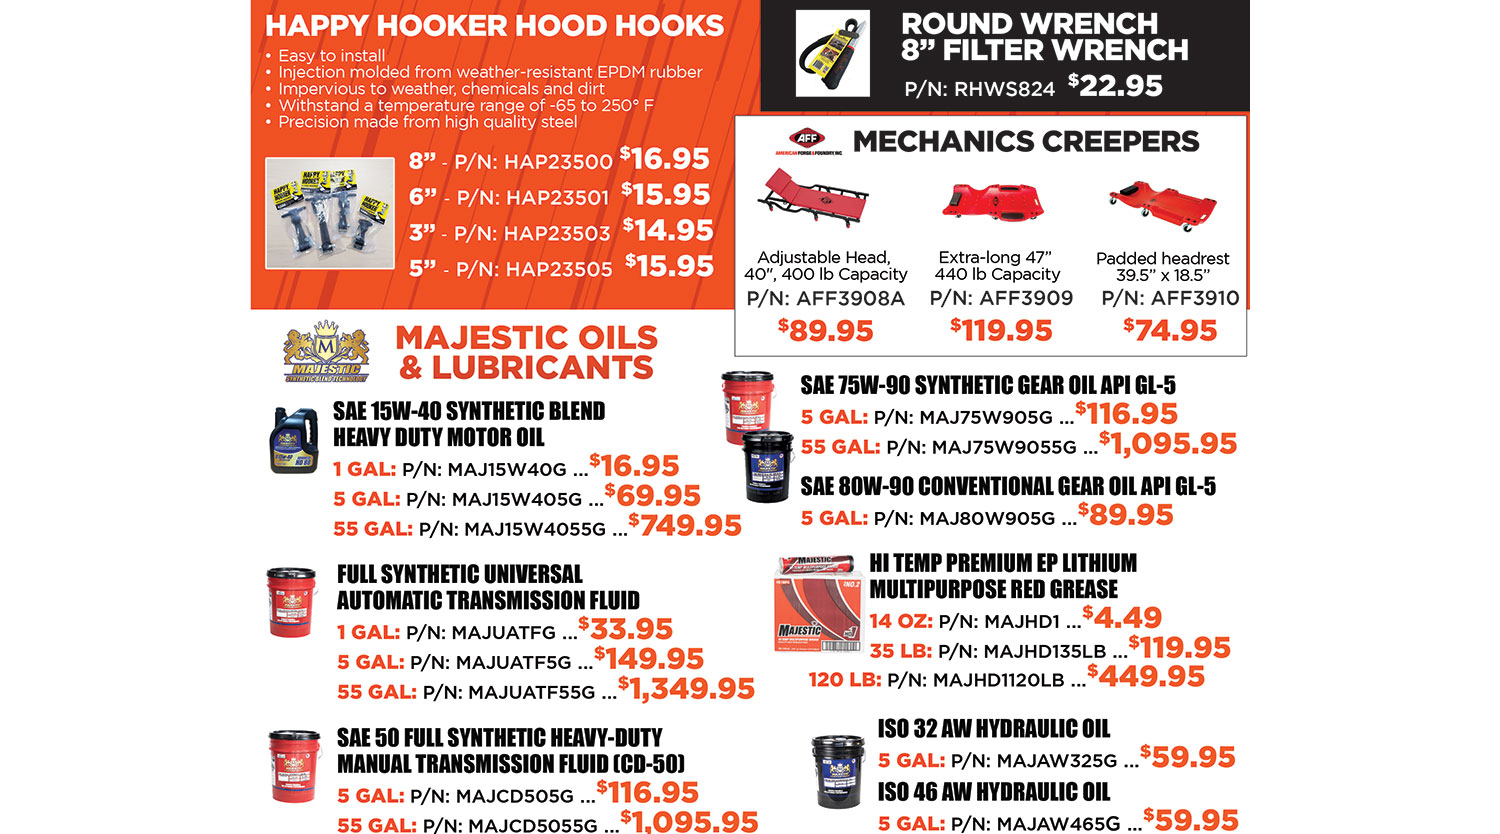 Save on hood hooks, mechanics creepers and majestic heavy duty oils and lubricants at McCandless …